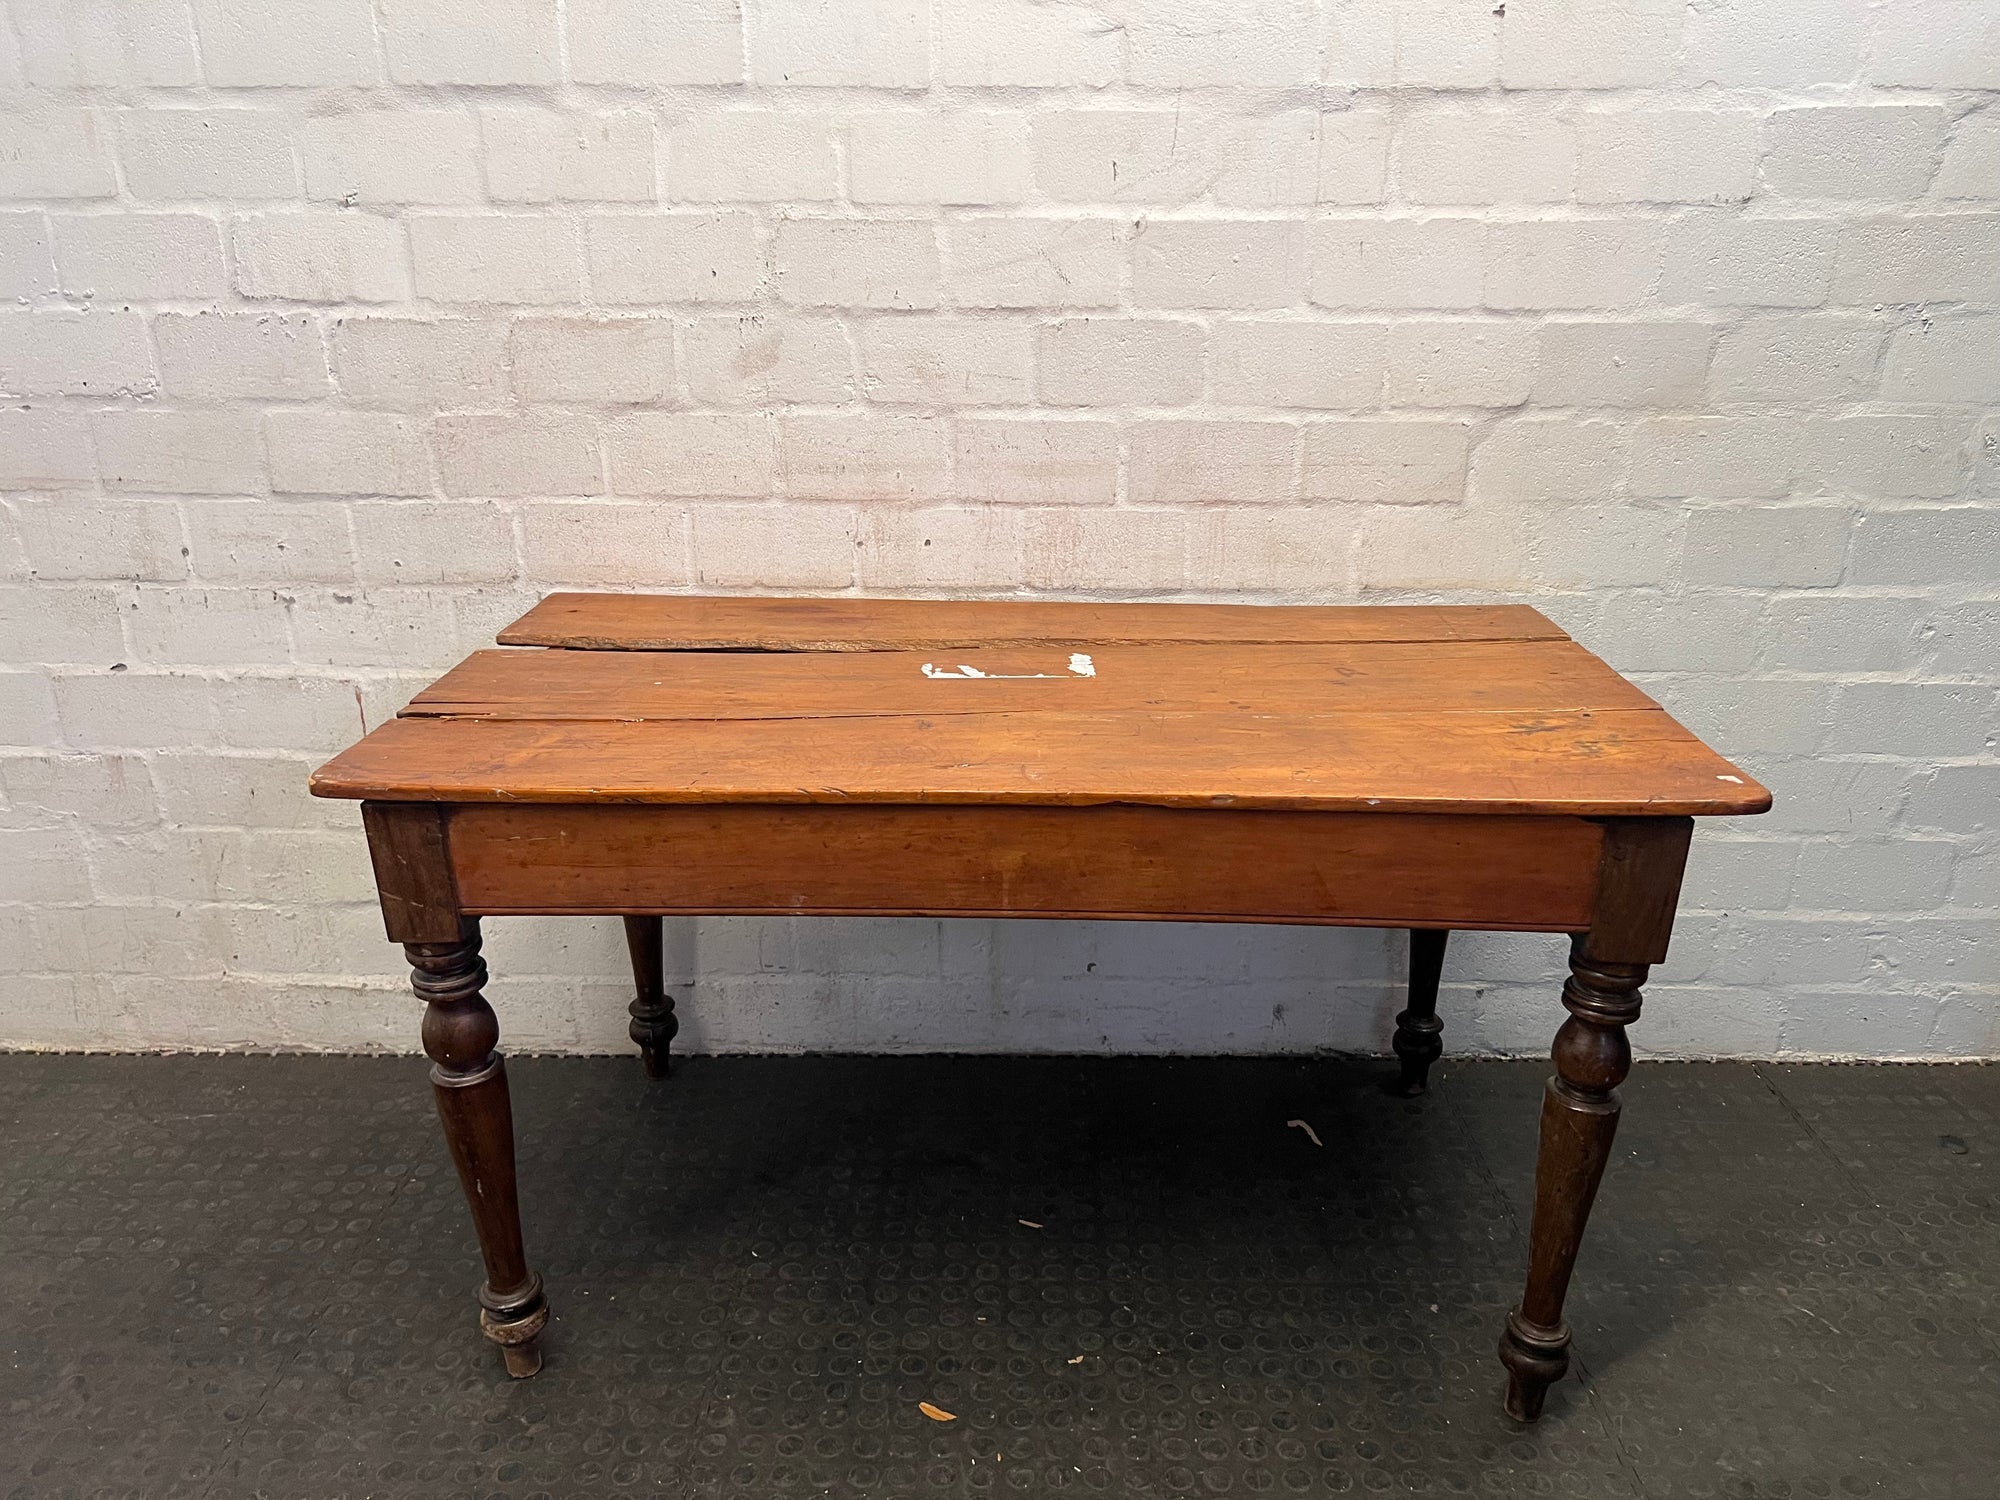 Vintage Kitchen Table - Lots of character needs TLC